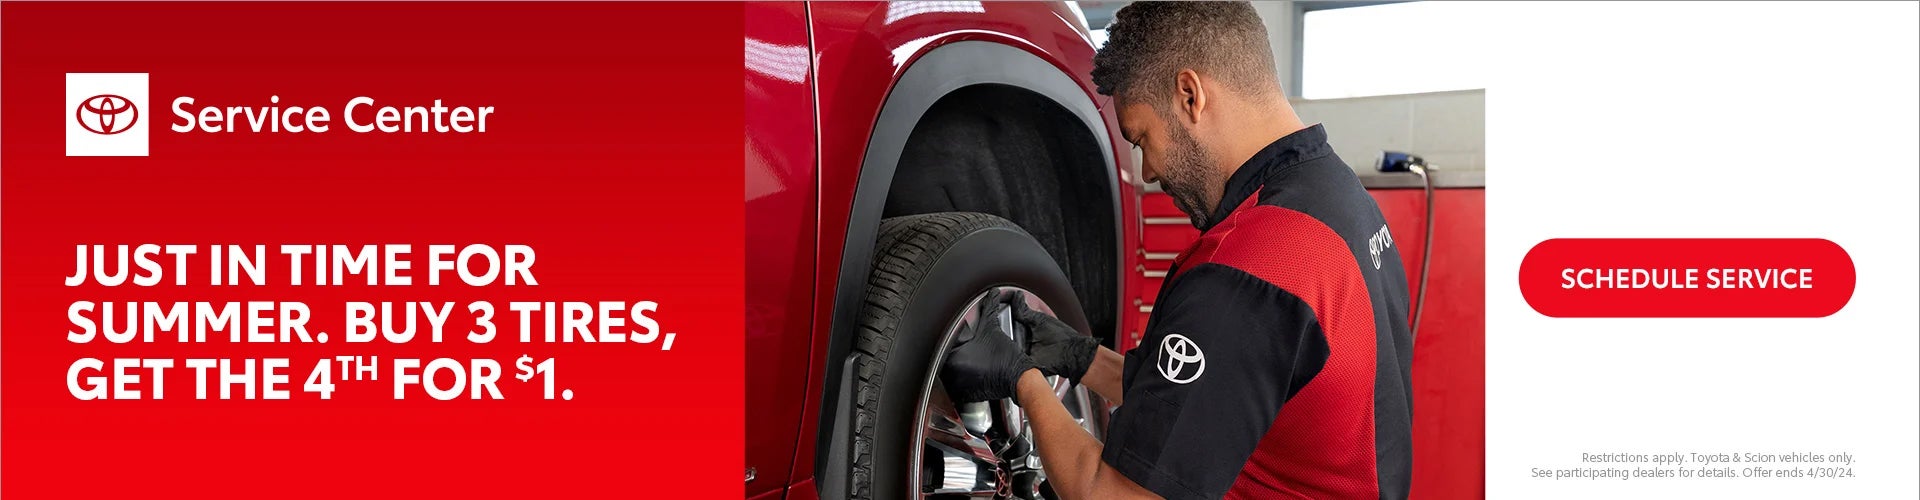 Buy 3 Tires, Get 1 for $1 @ Toyota Direct!